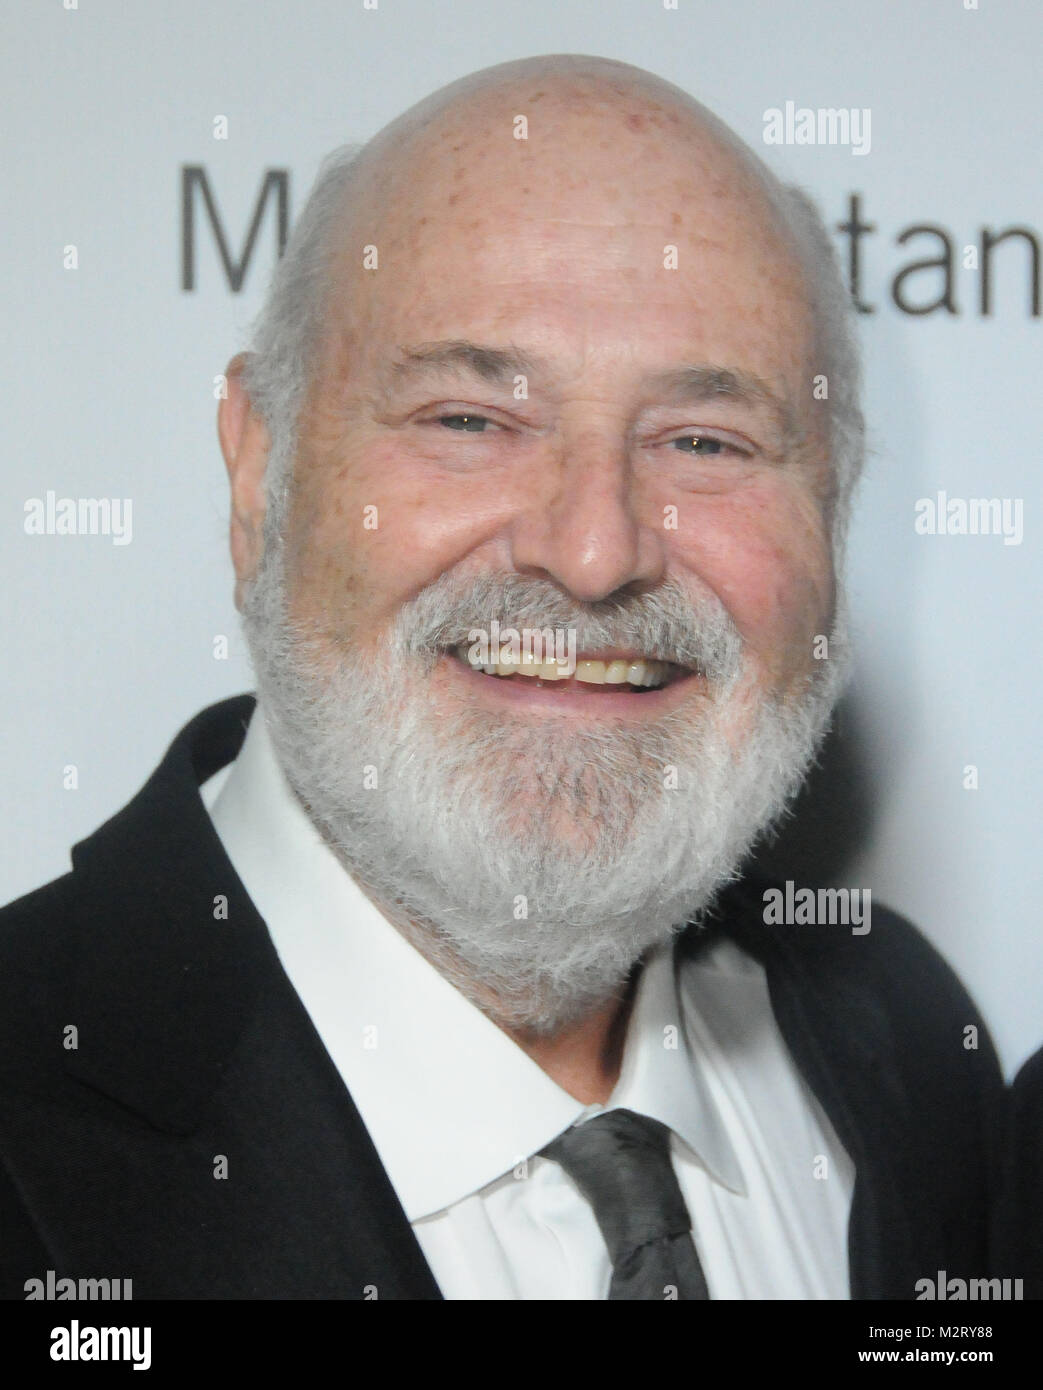 Los Angeles, California, USA. 7th February, 2018. Director Rob Reiner attends the 9th Annual African American Film Critics Assocation Awards at Taglyan Cultural Complex on February 7, 2018 in Los Angeles, California. Photo by Barry King/Alamy Live News Stock Photo